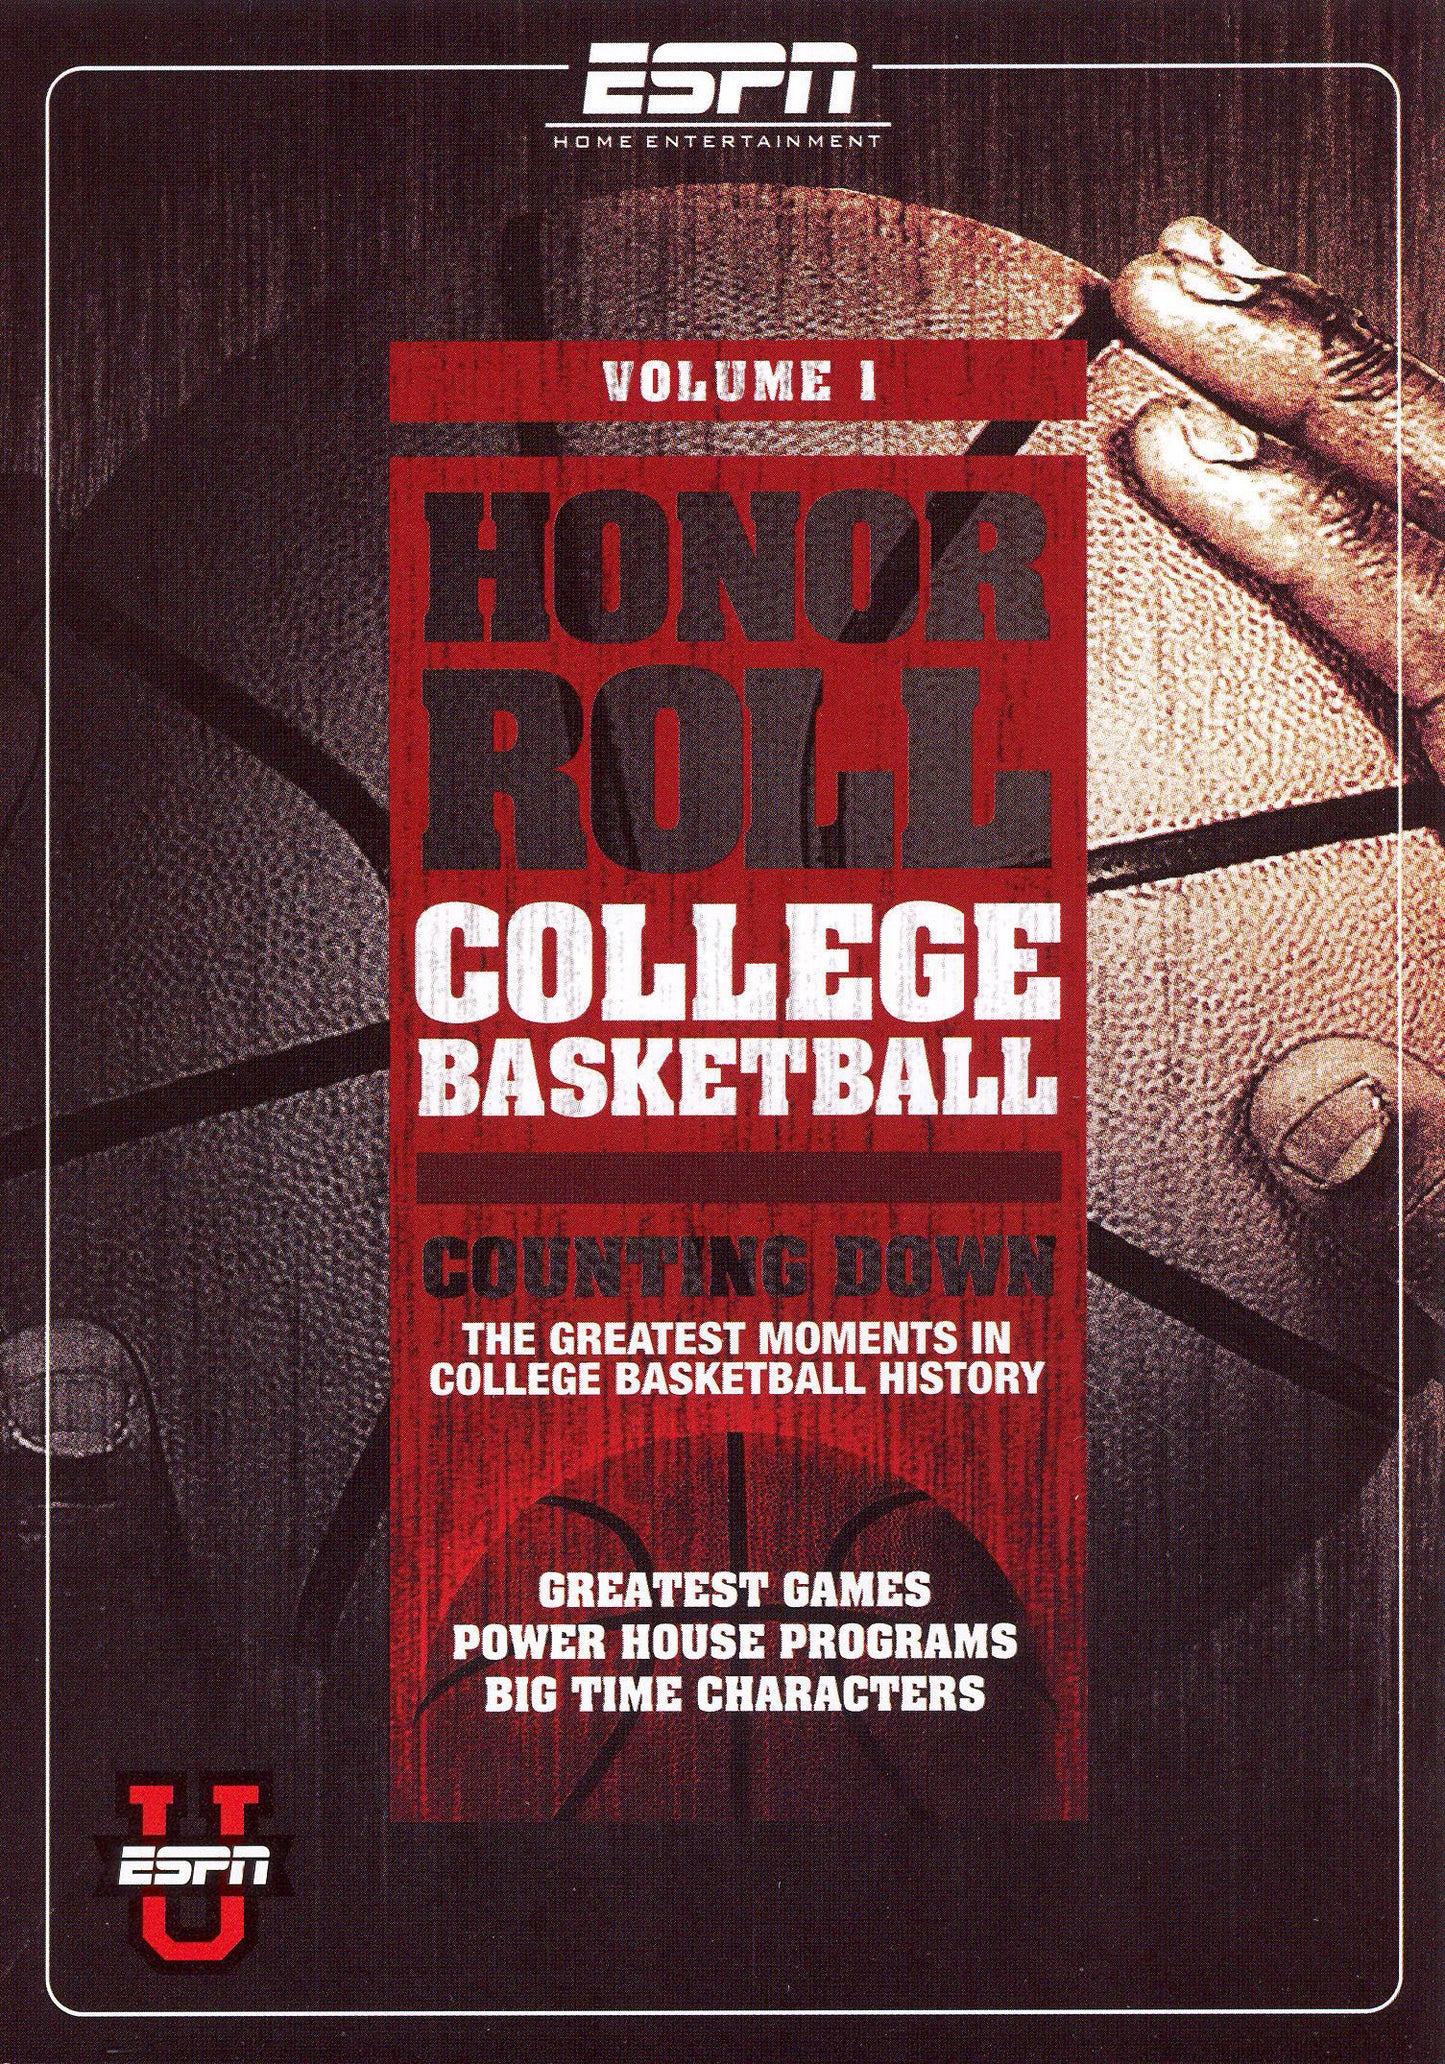 Honor Roll College Basketball, Vol. 1 cover art